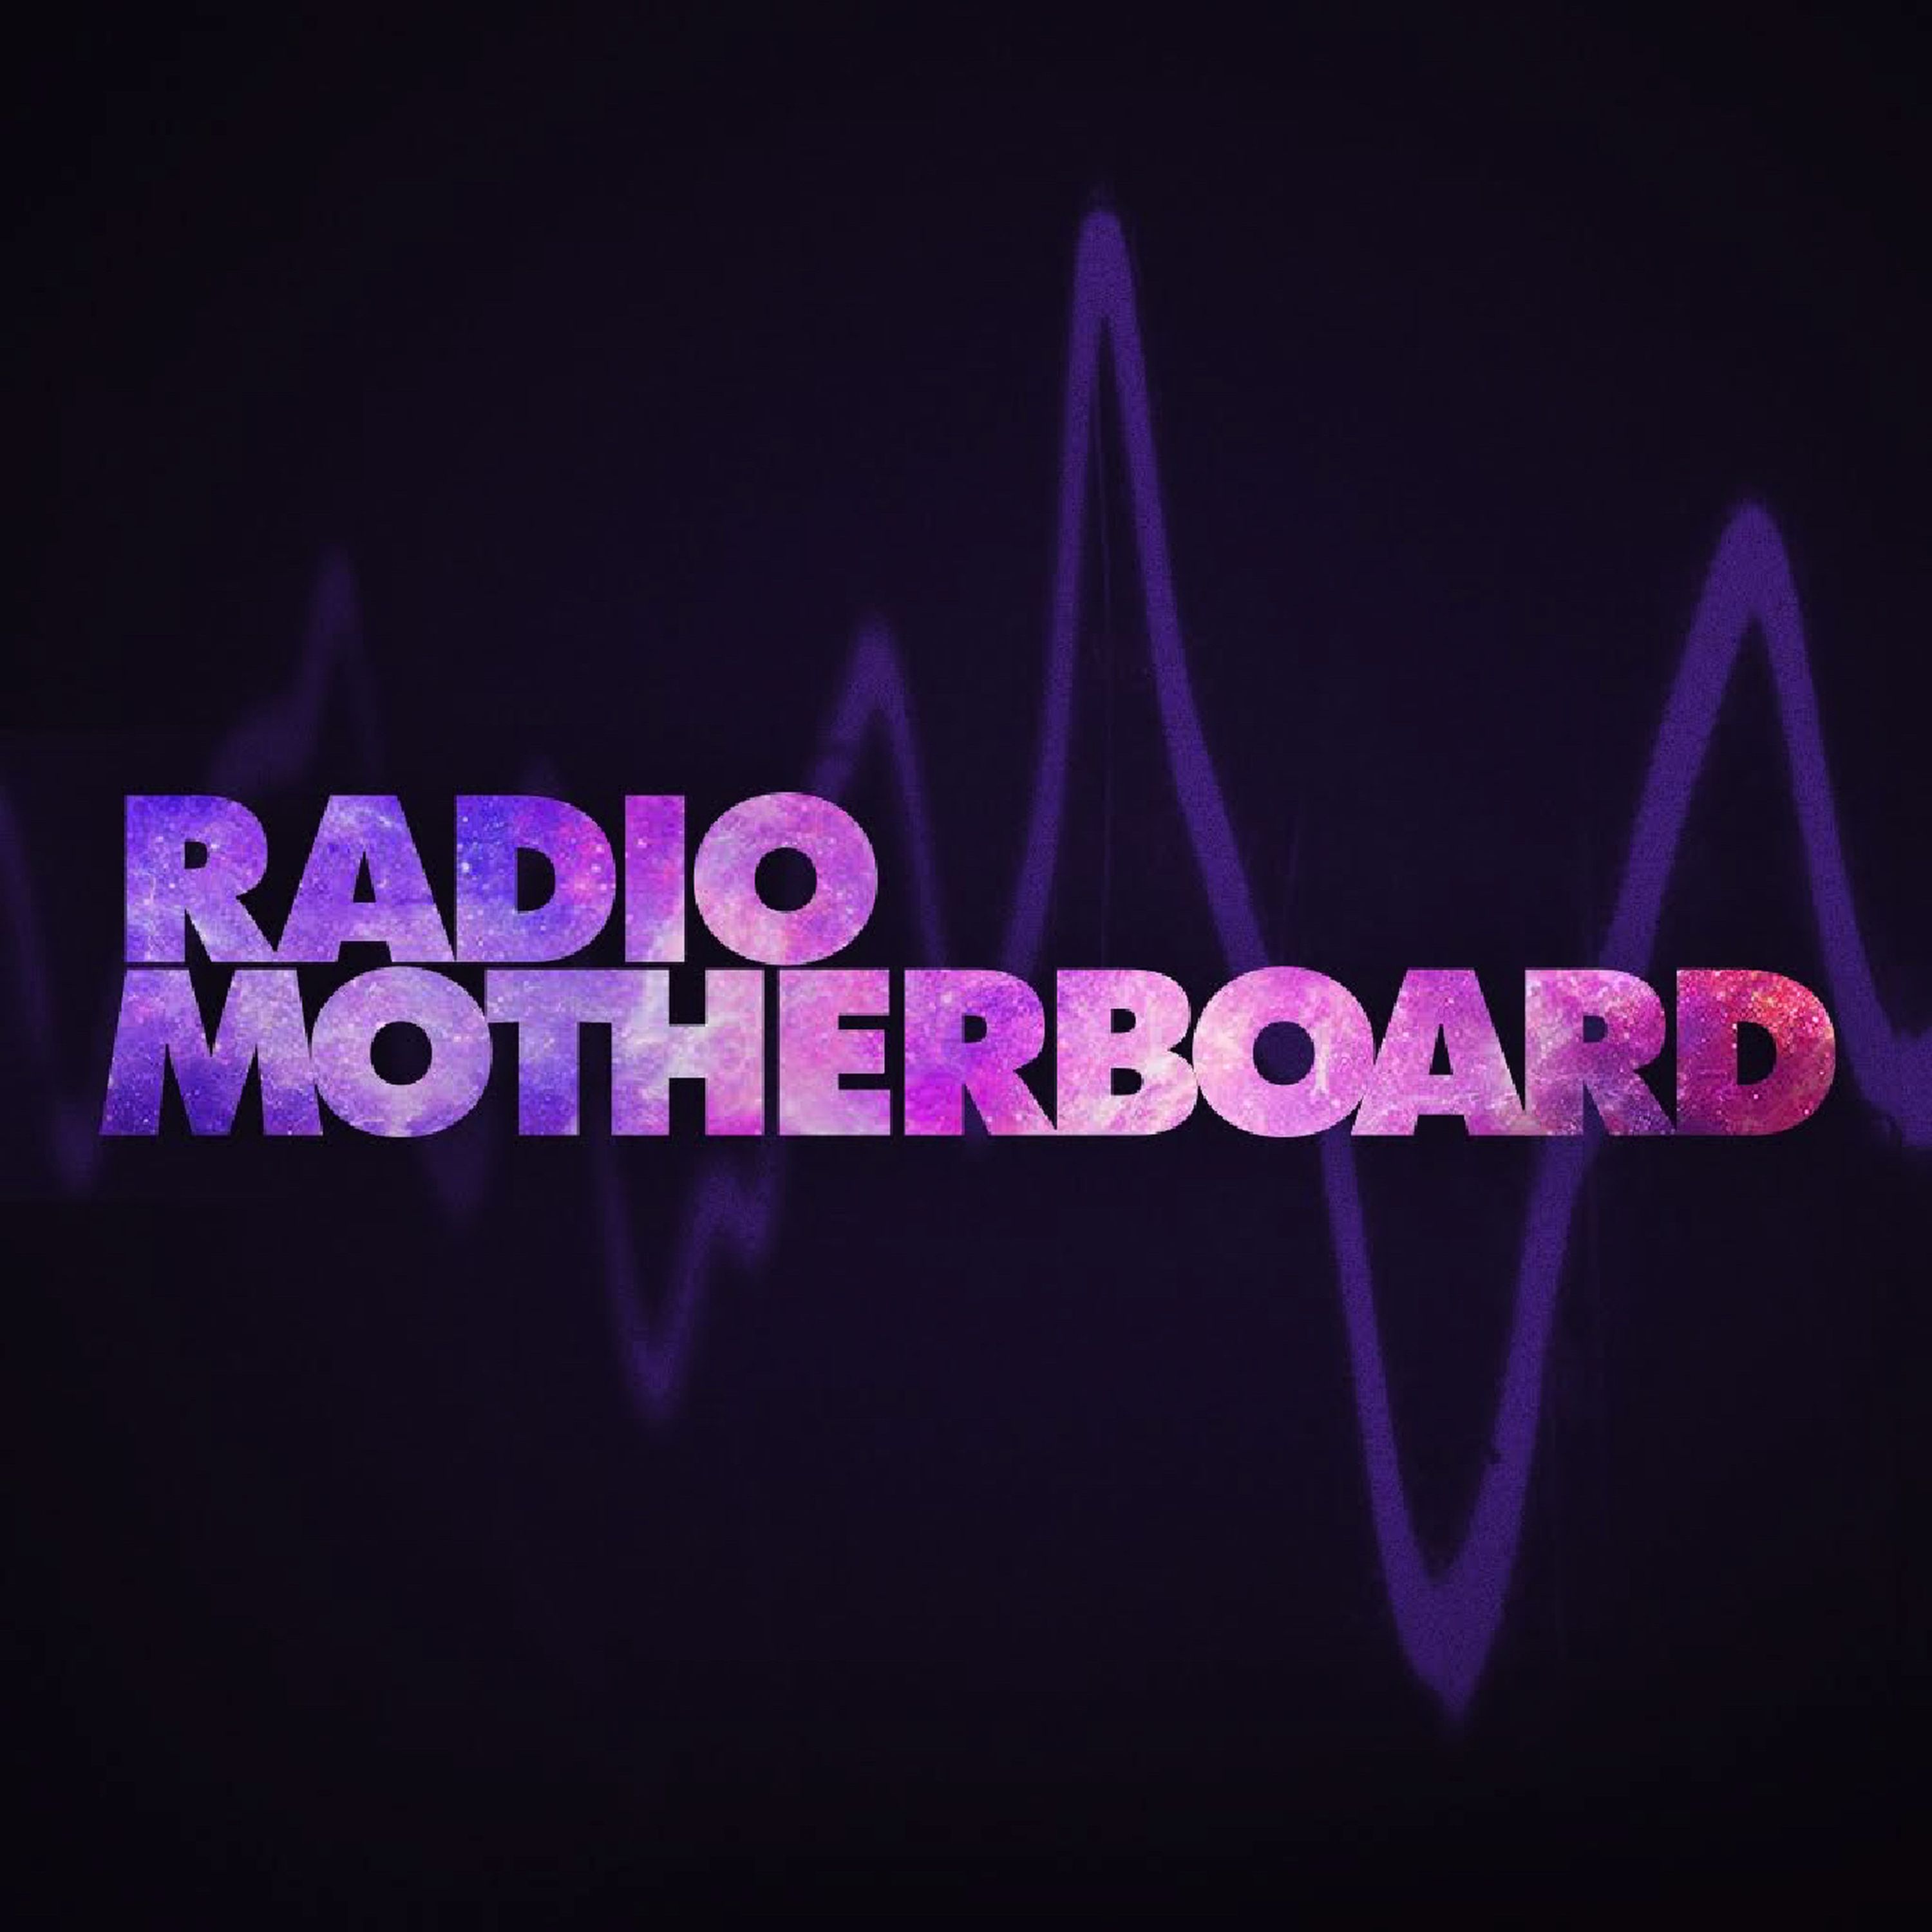 Radio Motherboard Live: What Is the iPhone?